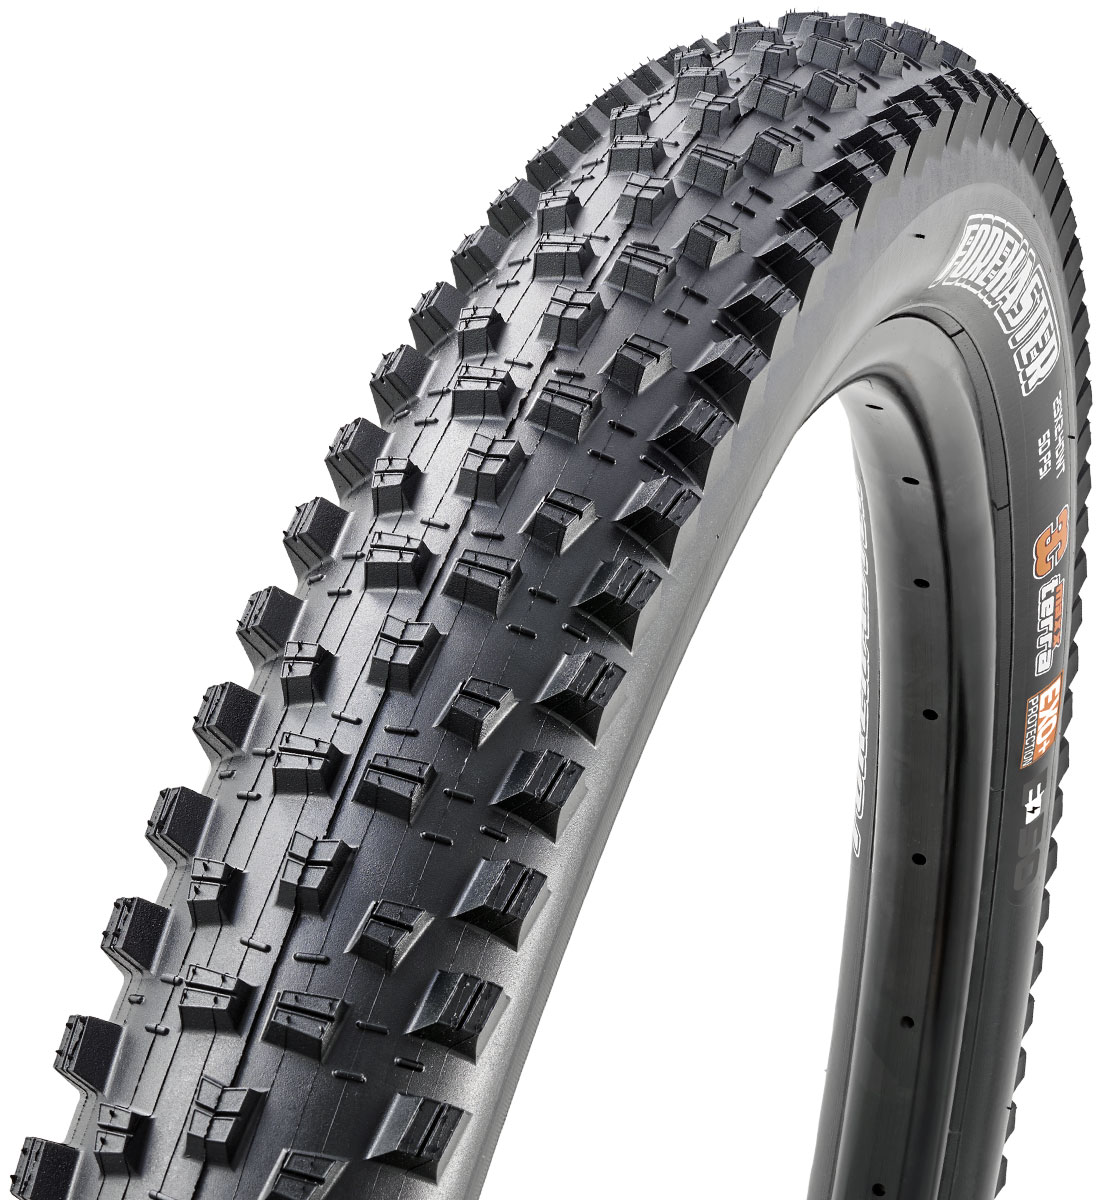 Exo 29 x 2.35 Dual Compound TB96733100 Maxxis Forekaster K Tubeless Tire 